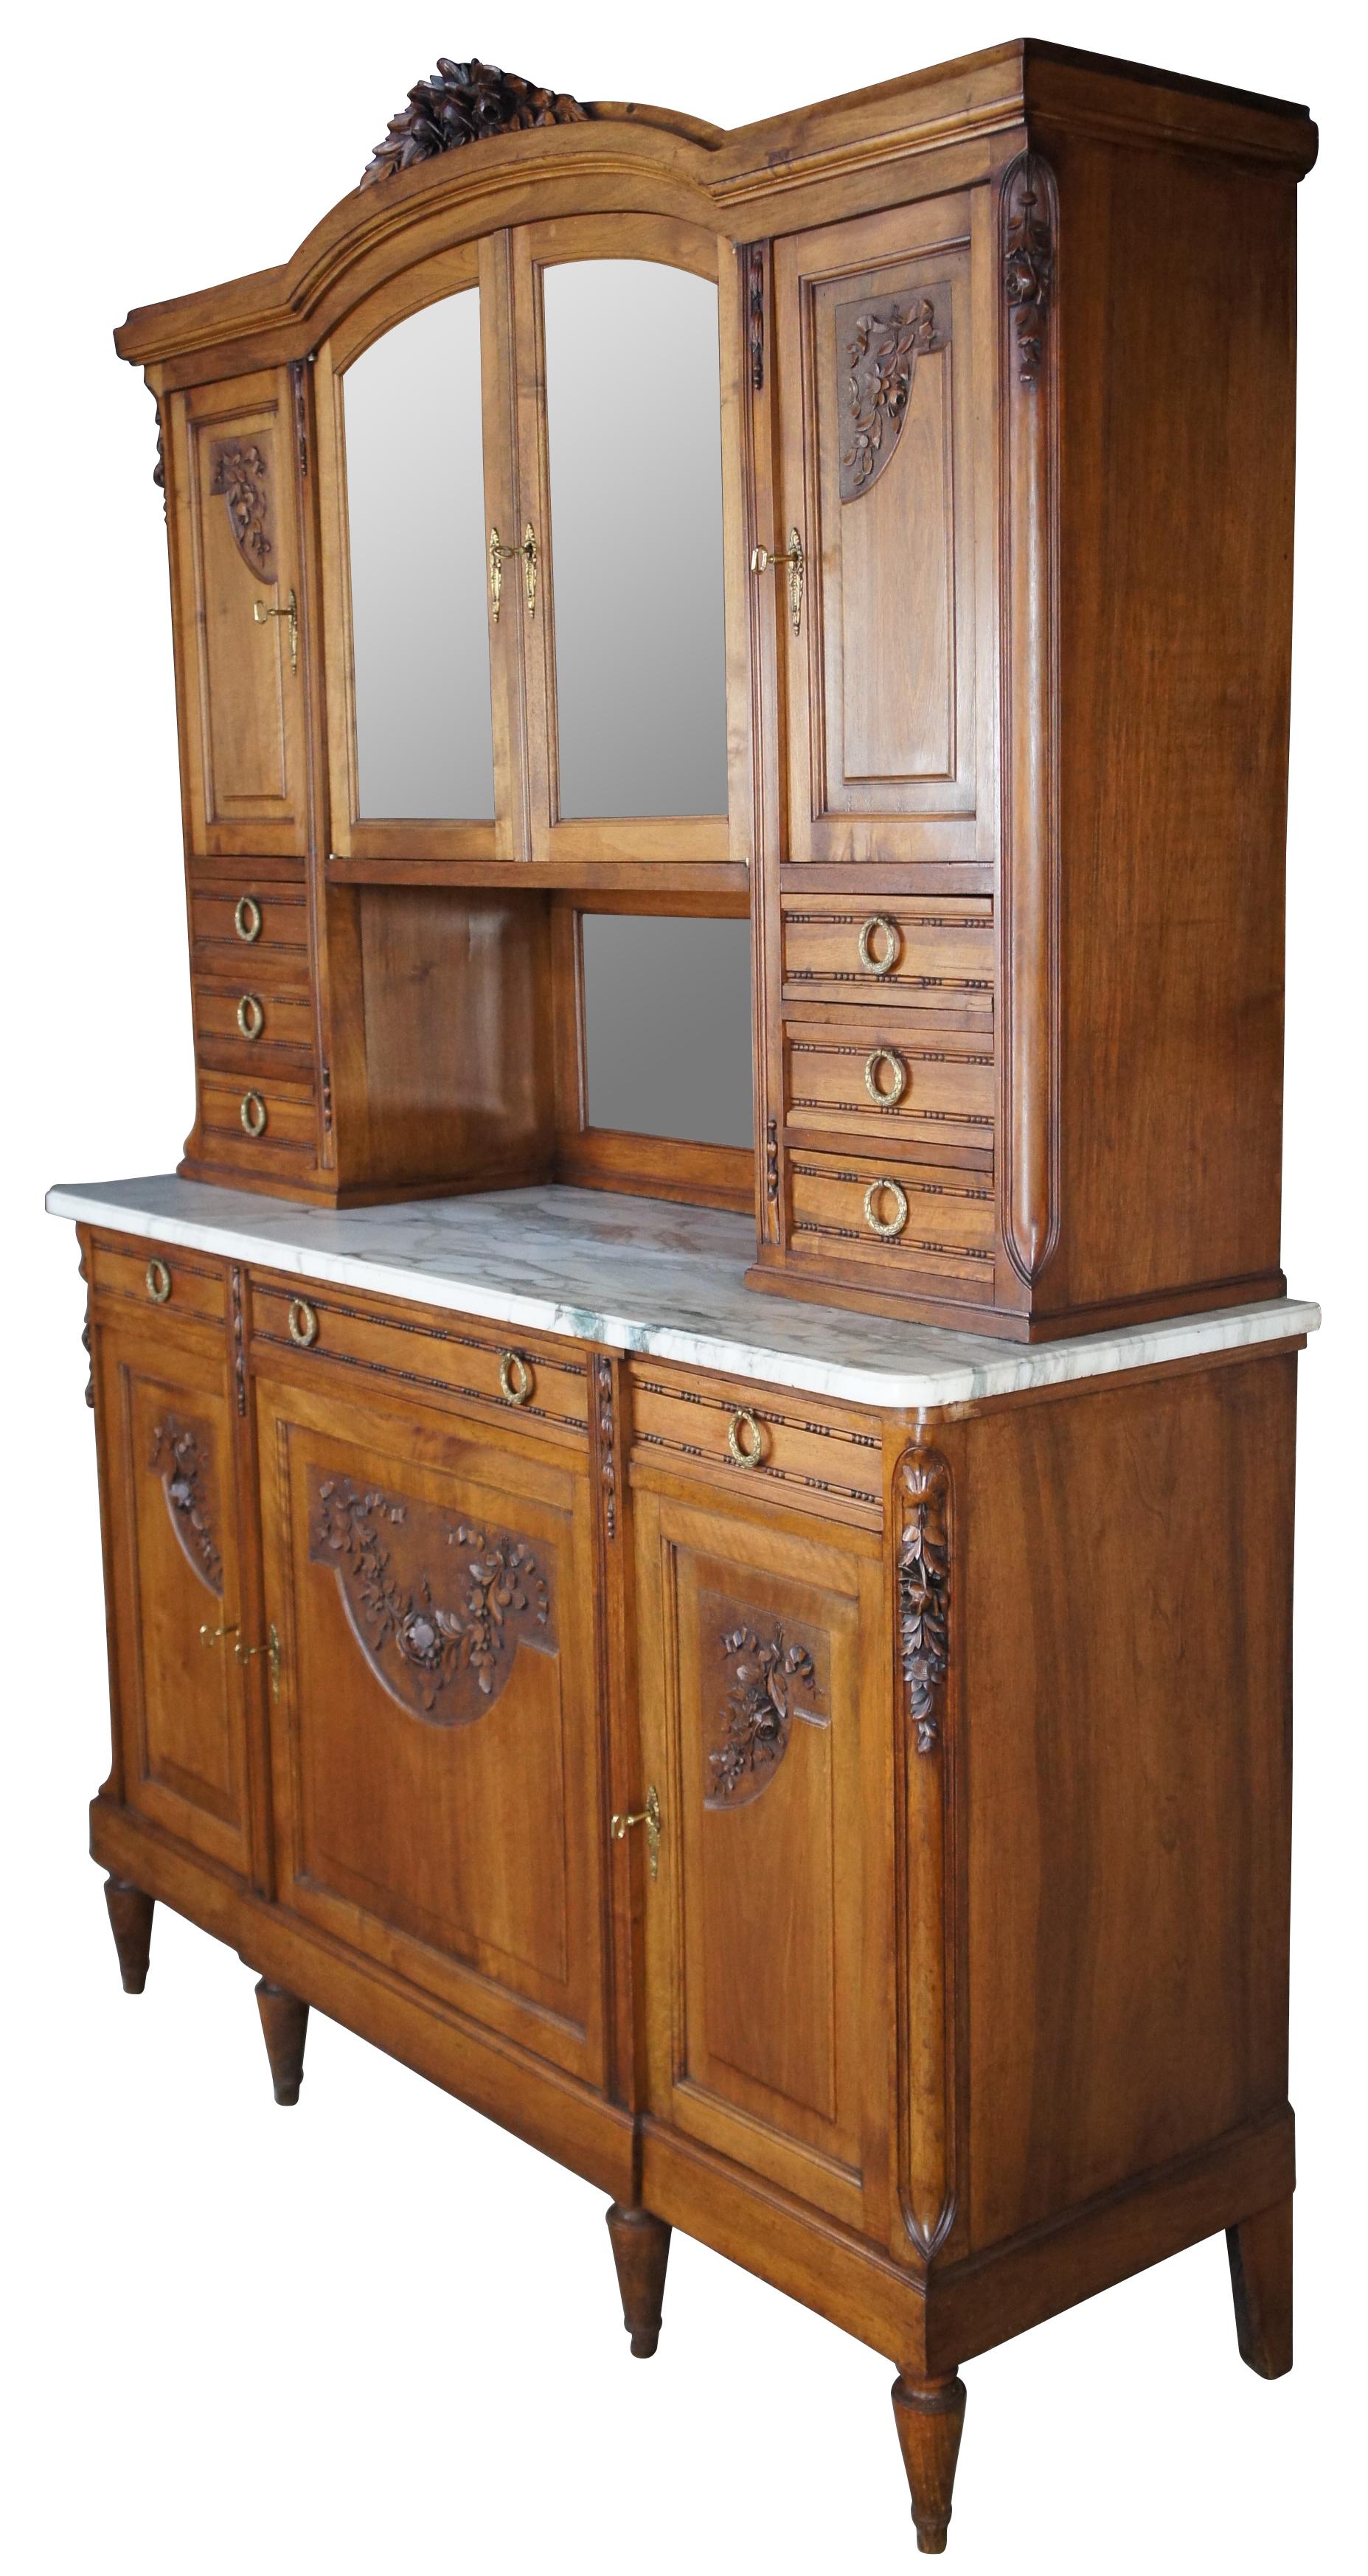 Antique Victorian era French Renaissance Huntboard, circa 1890s. Made from walnut with beautiful foliate hand carvings, a white marble top and intricate mirrored hutch. Buffet portion features three drawers with beaded carving and neoclassical brass